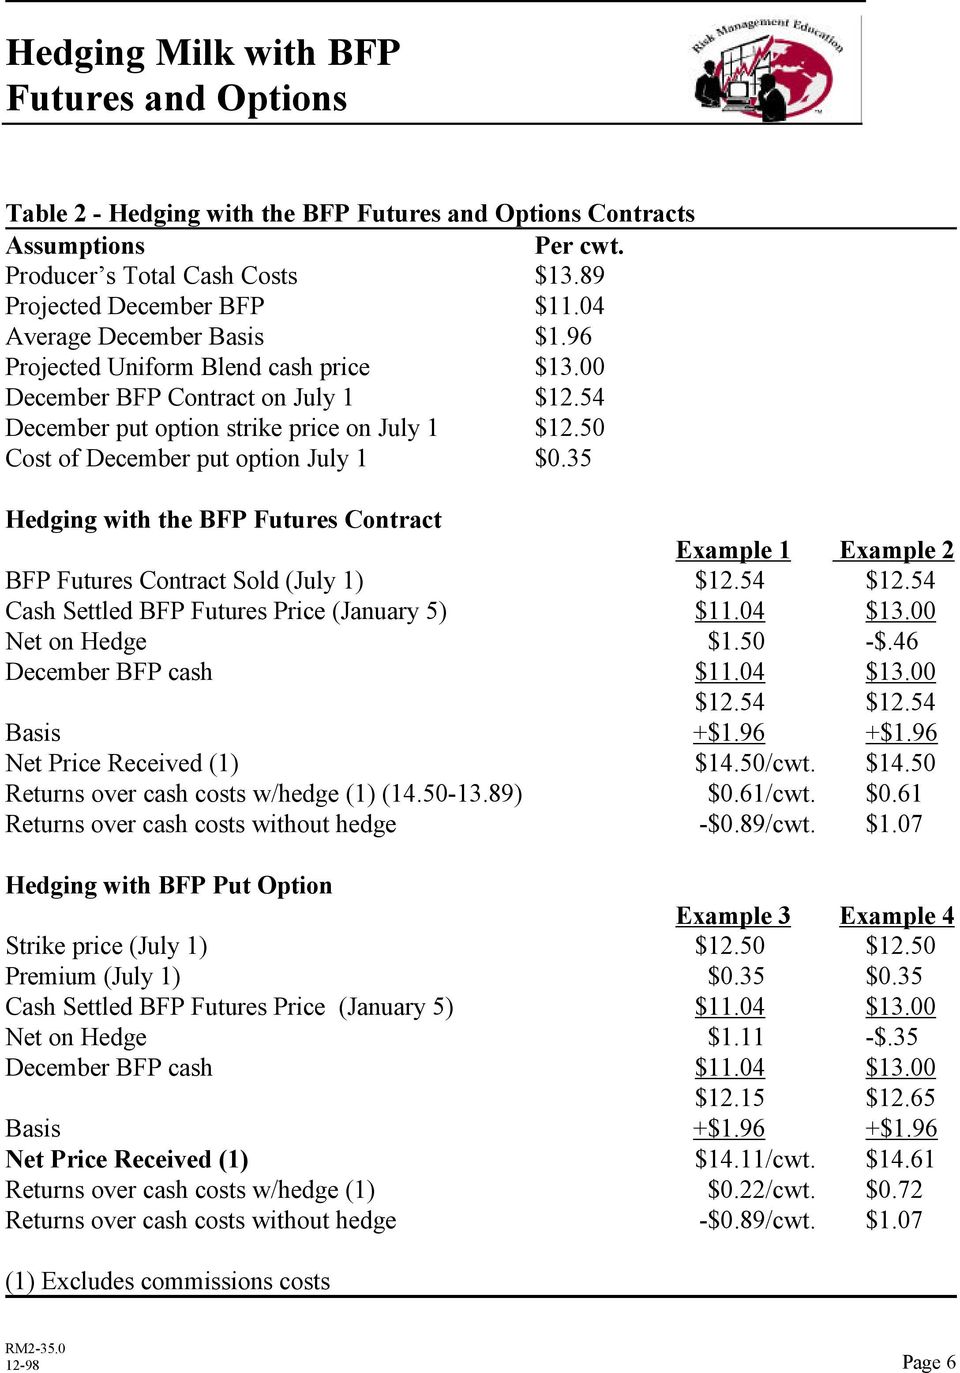 35 Hedging with the BFP Futures Contract Example 1 Example 2 BFP Futures Contract Sold (July 1) $12.54 $12.54 Cash Settled BFP Futures Price (January 5) $11.04 $13.00 Net on Hedge $1.50 -$.